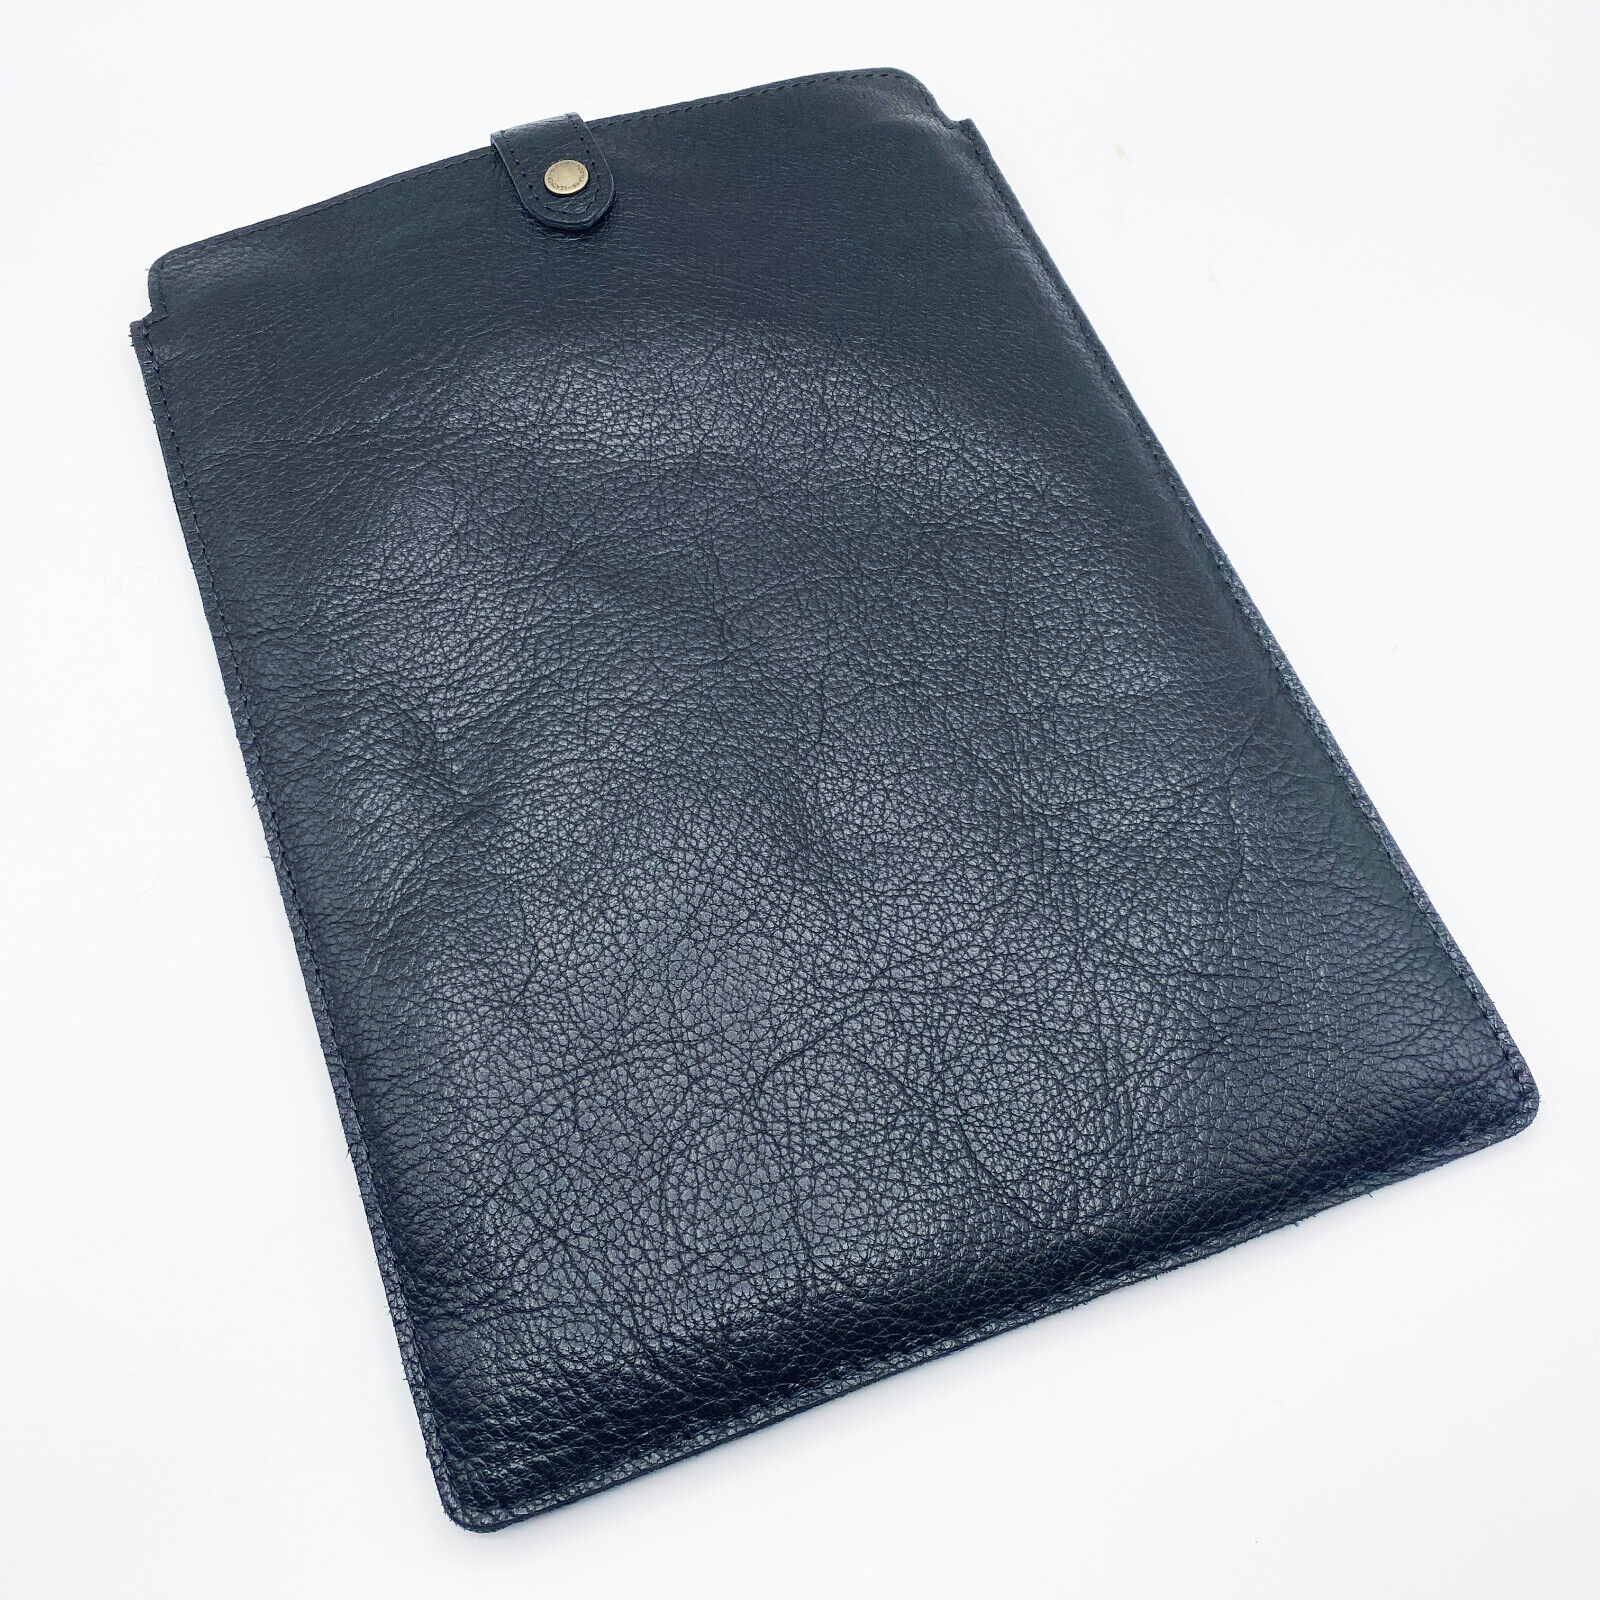 PORTLAND LEATHER GOODS Laptop Sleeve in Black Leather with Plush Lining